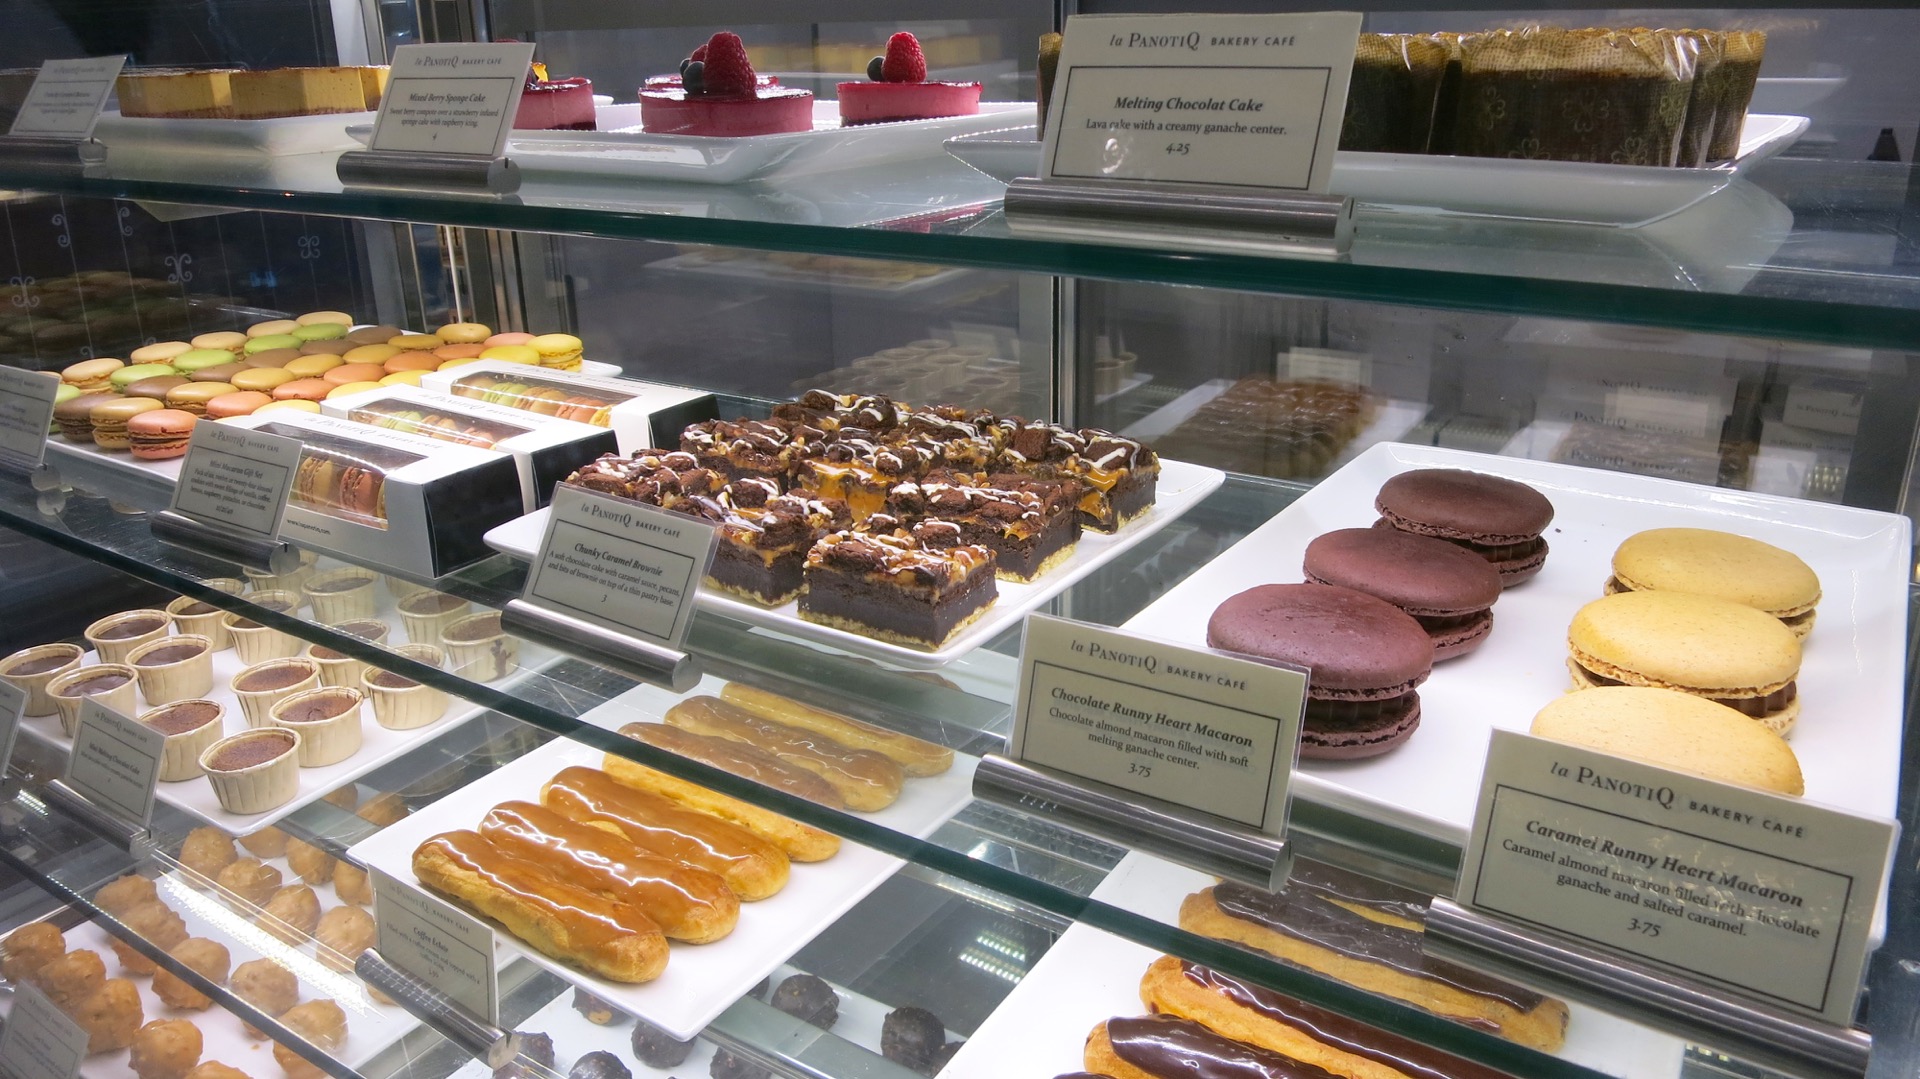 There's macarons of all sizes and flavors at La PanotiQ in Livermore.